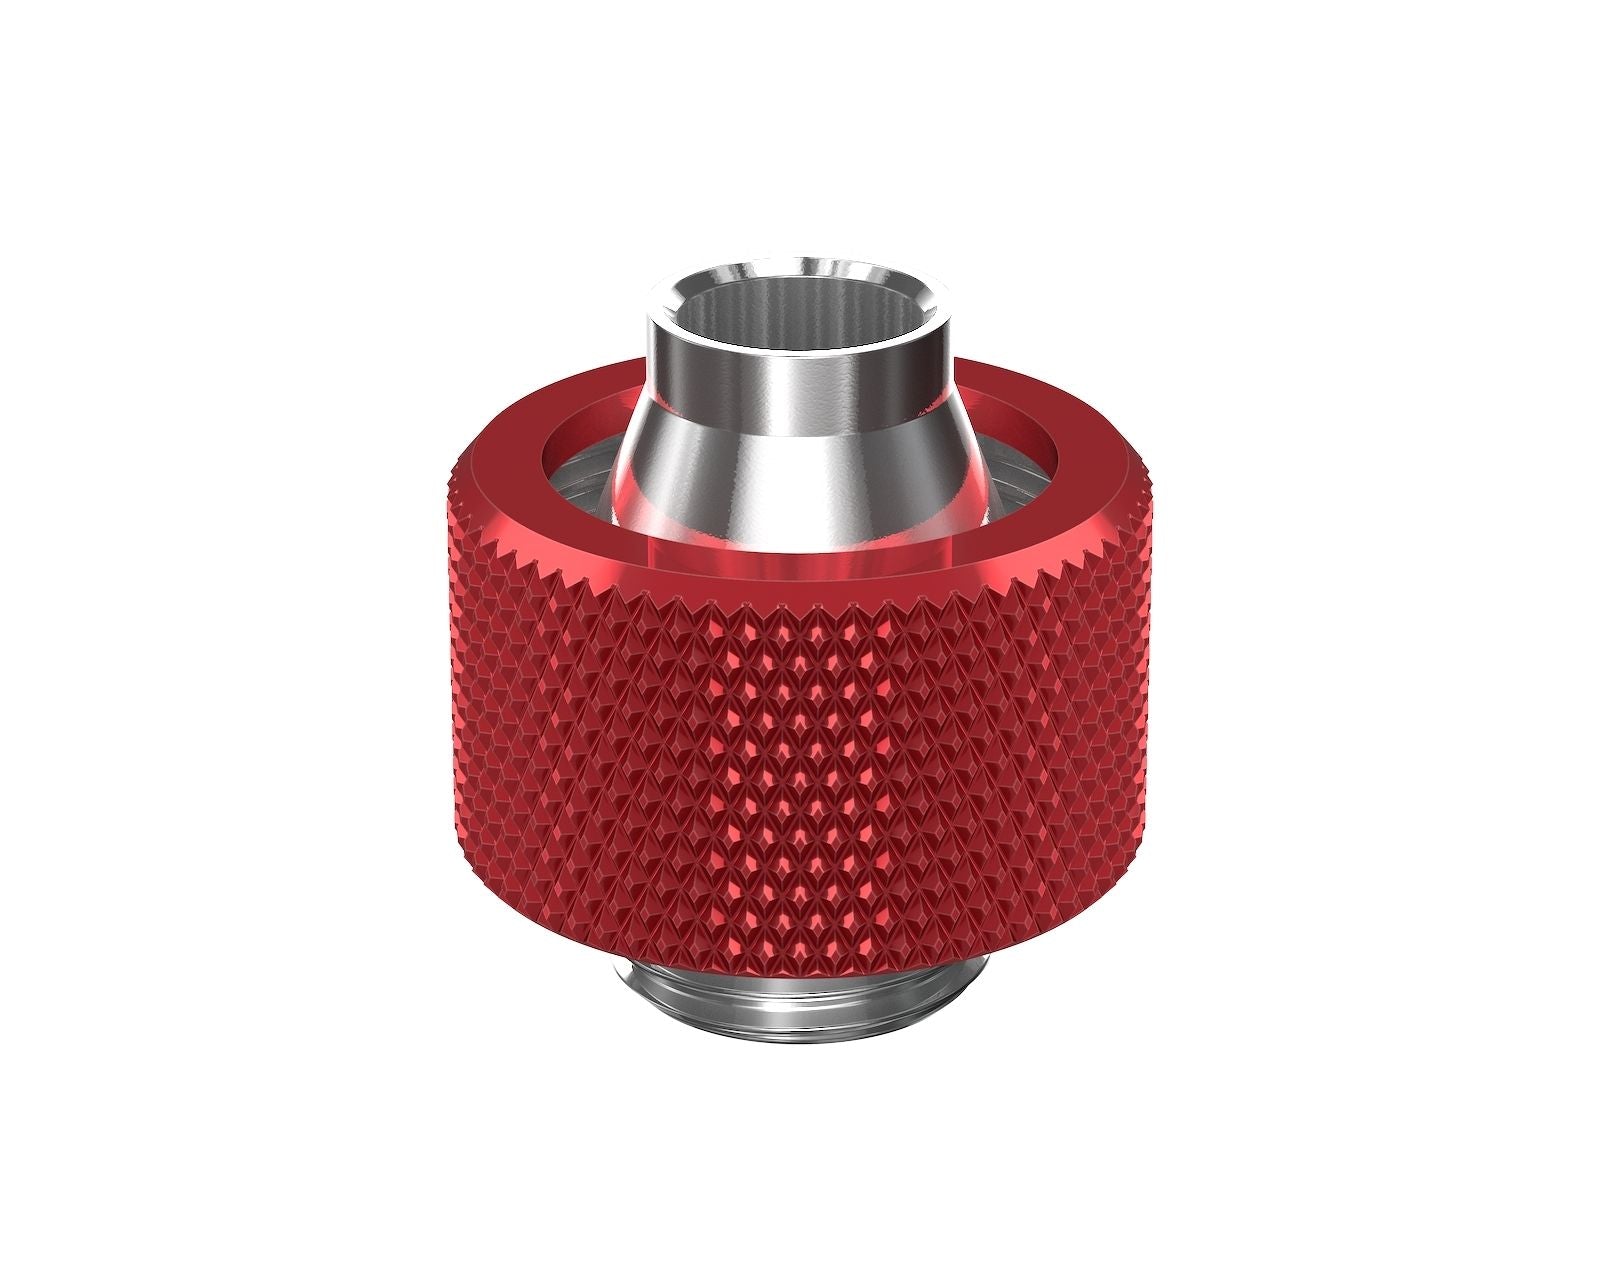 PrimoChill SecureFit SX - Premium Compression Fitting For 3/8in ID x 5/8in OD Flexible Tubing (F-SFSX58) - Available in 20+ Colors, Custom Watercooling Loop Ready - Candy Red